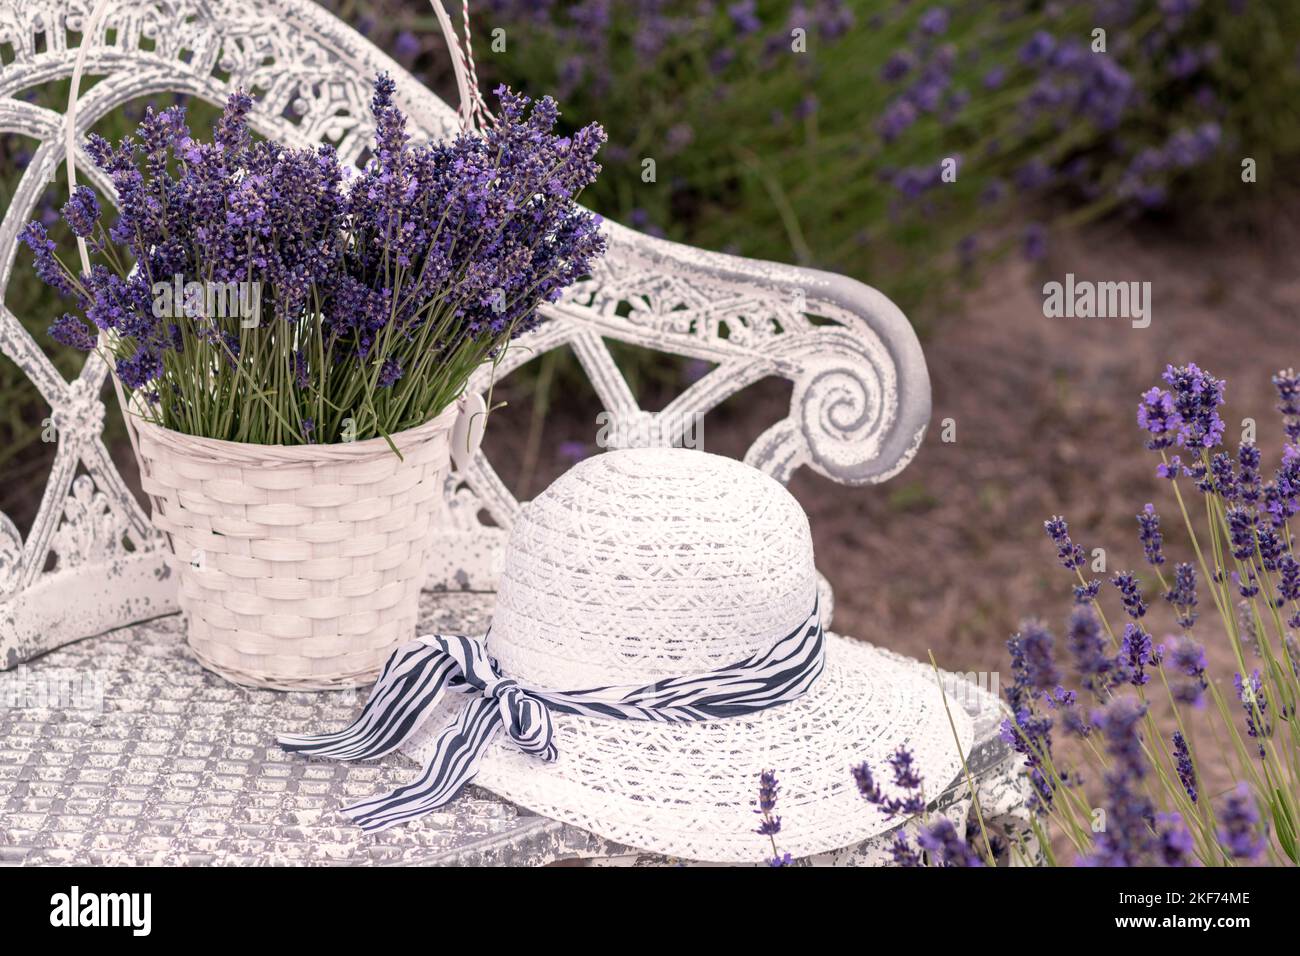 Freshly harvested French lavender bouquet in a basket and a white straw hat on a design vintage table Stock Photo